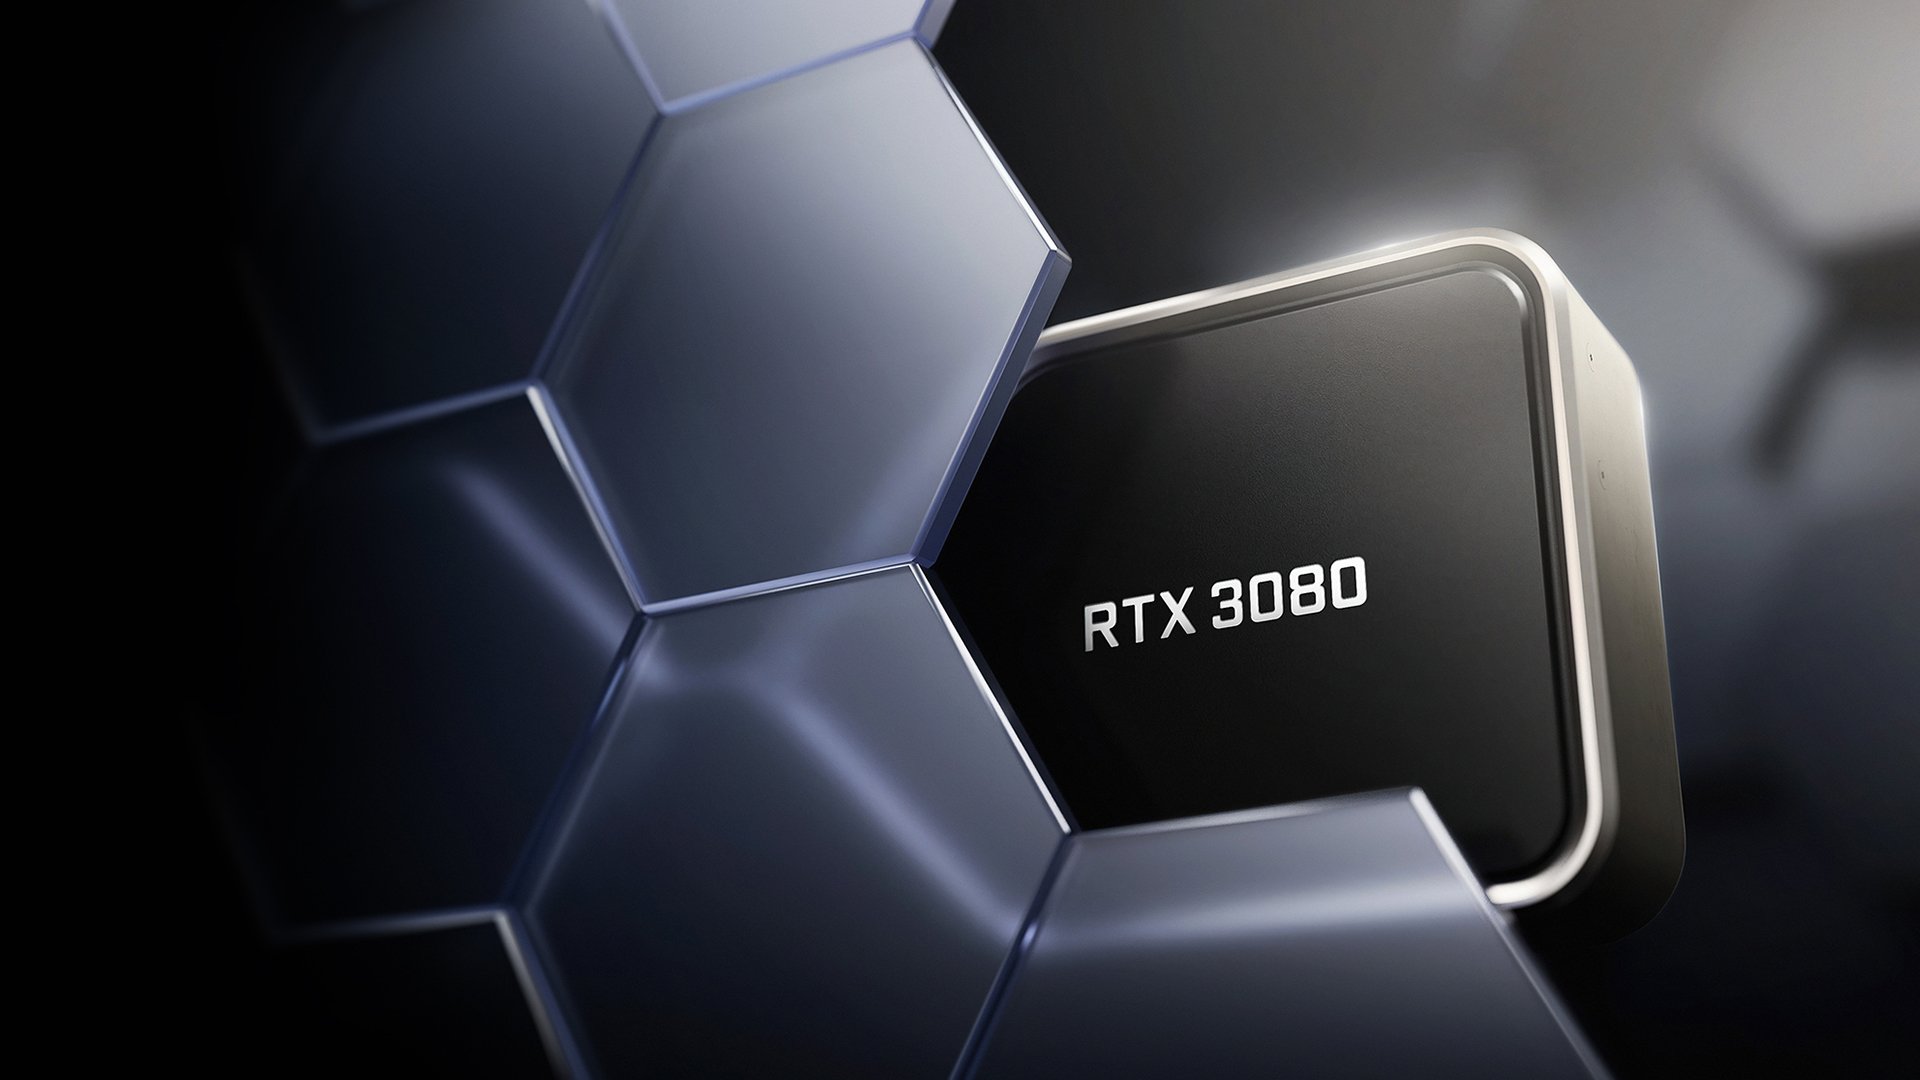 GeForce Now Adds Monthly Payment Option for RTX 3080 Plan